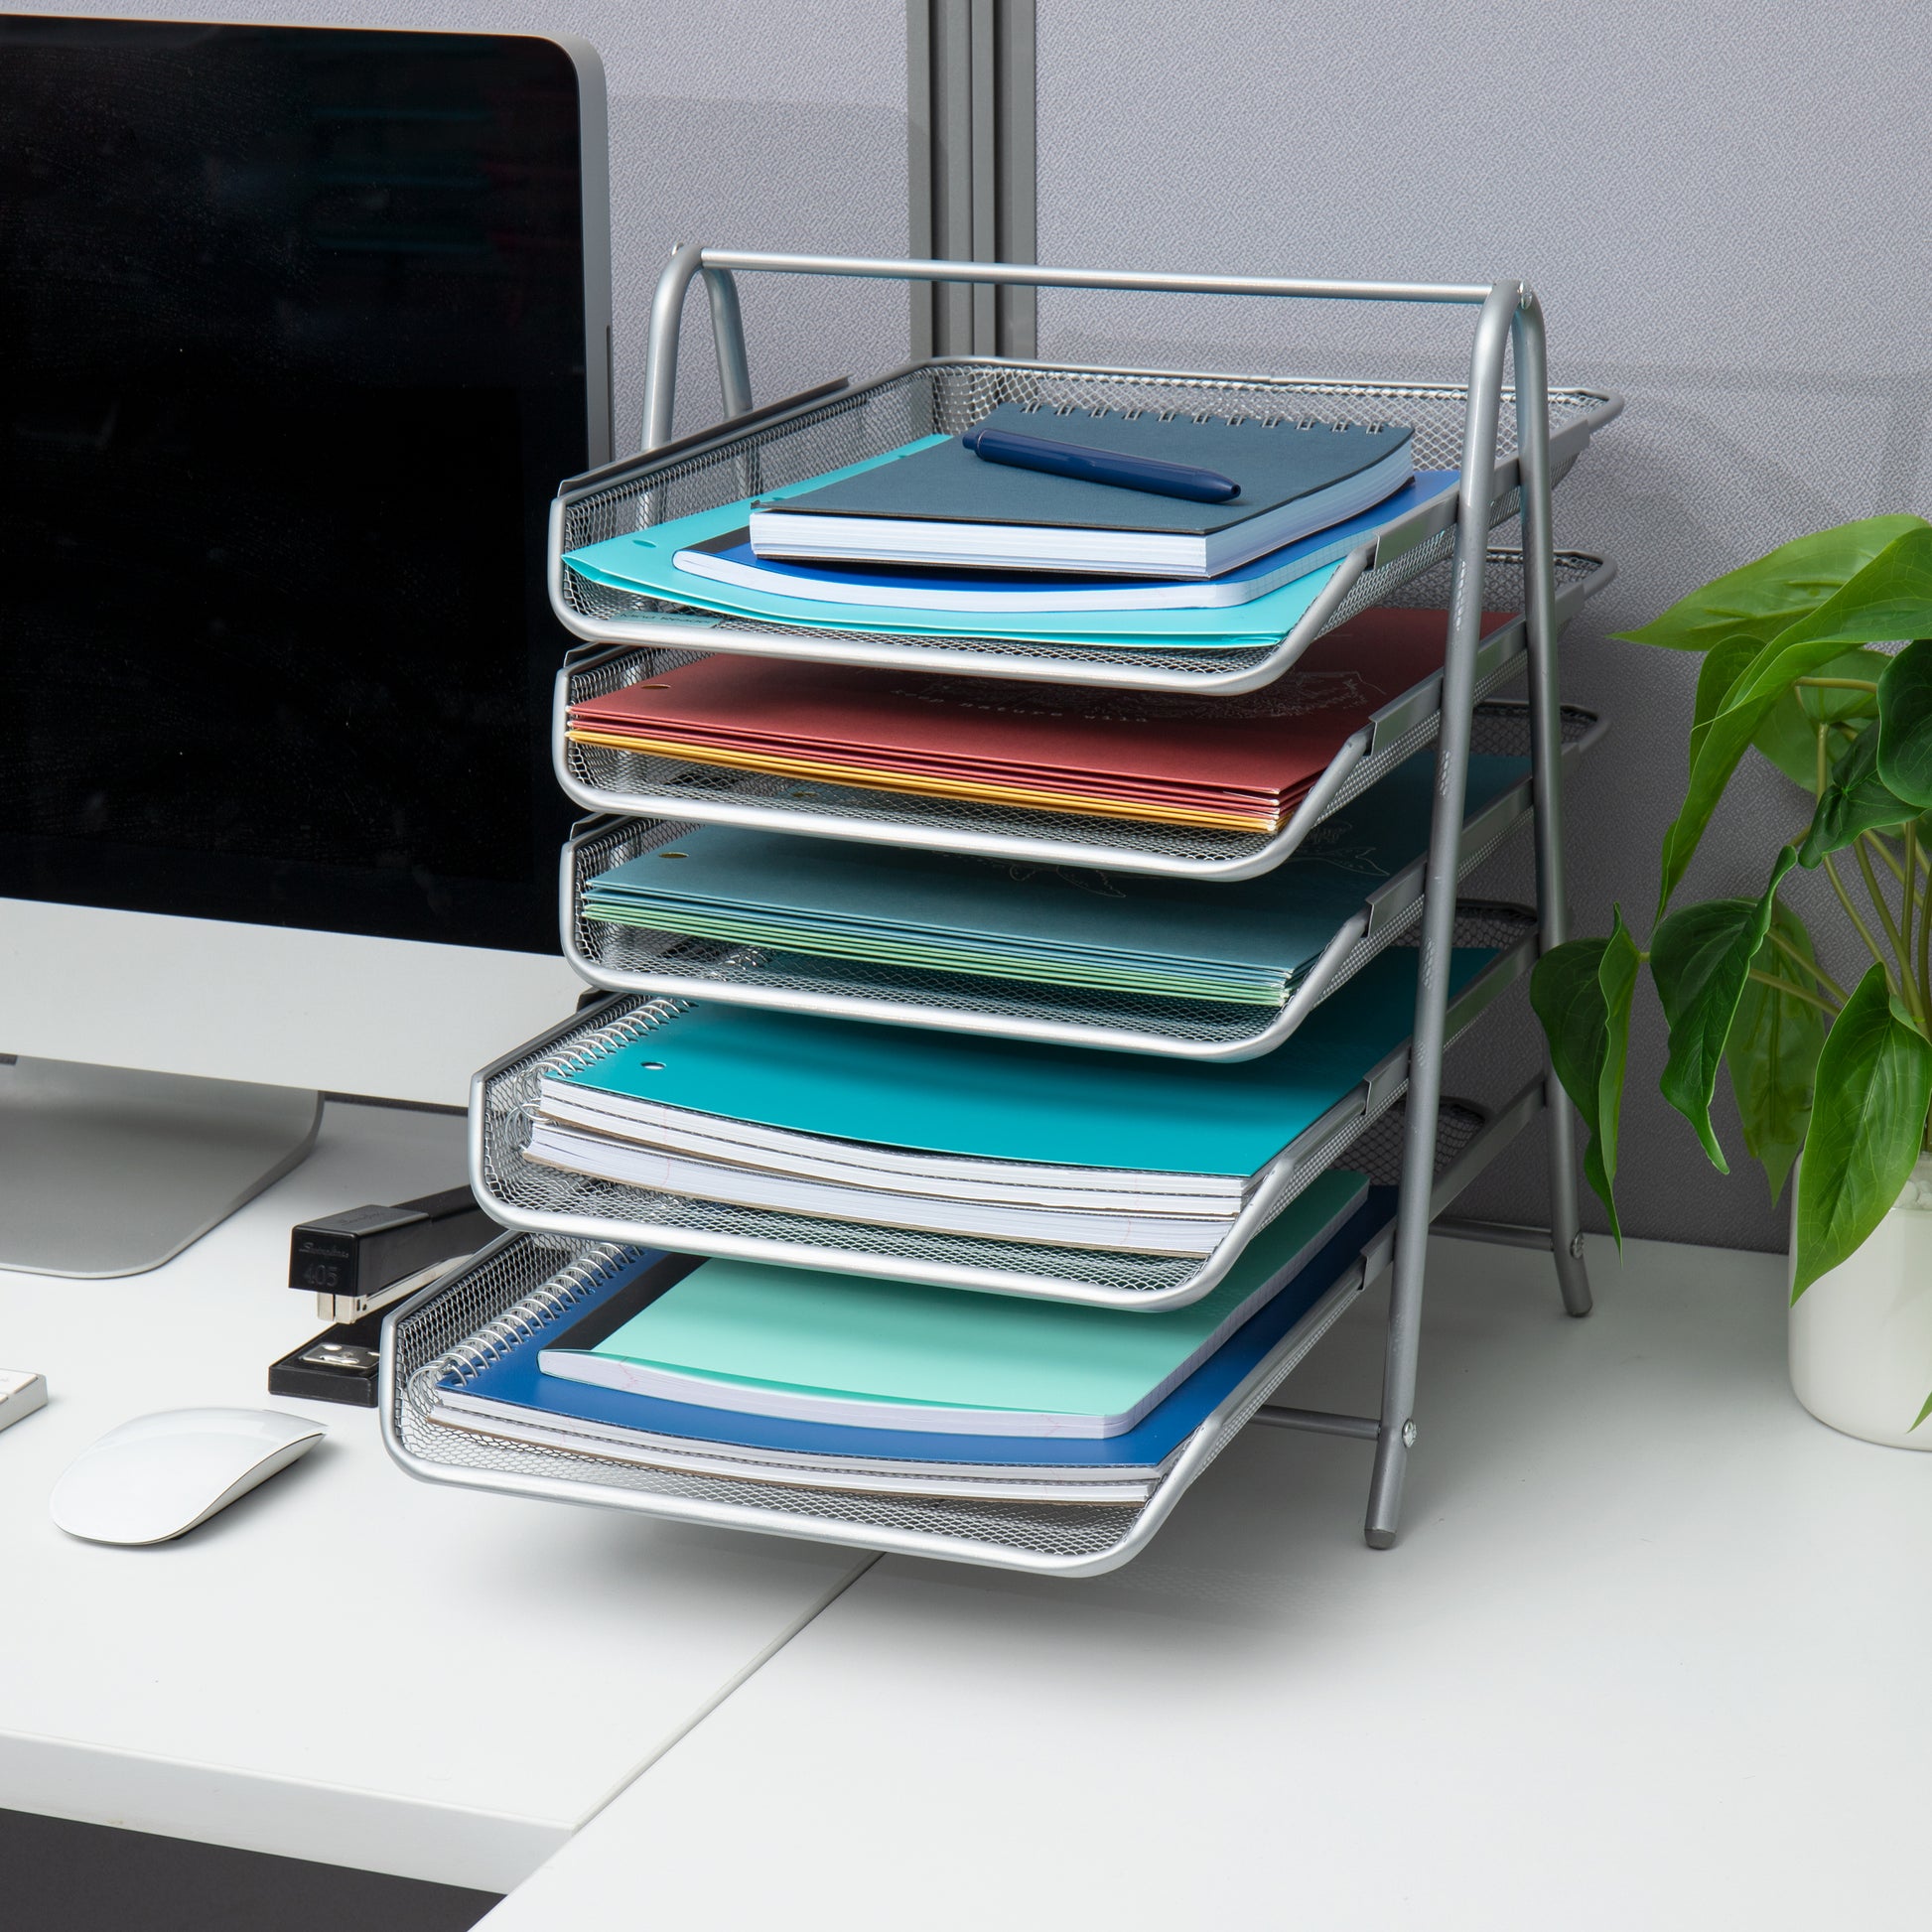 Mind Reader 5 Compartments Desk Organizer Tray - Turquoise